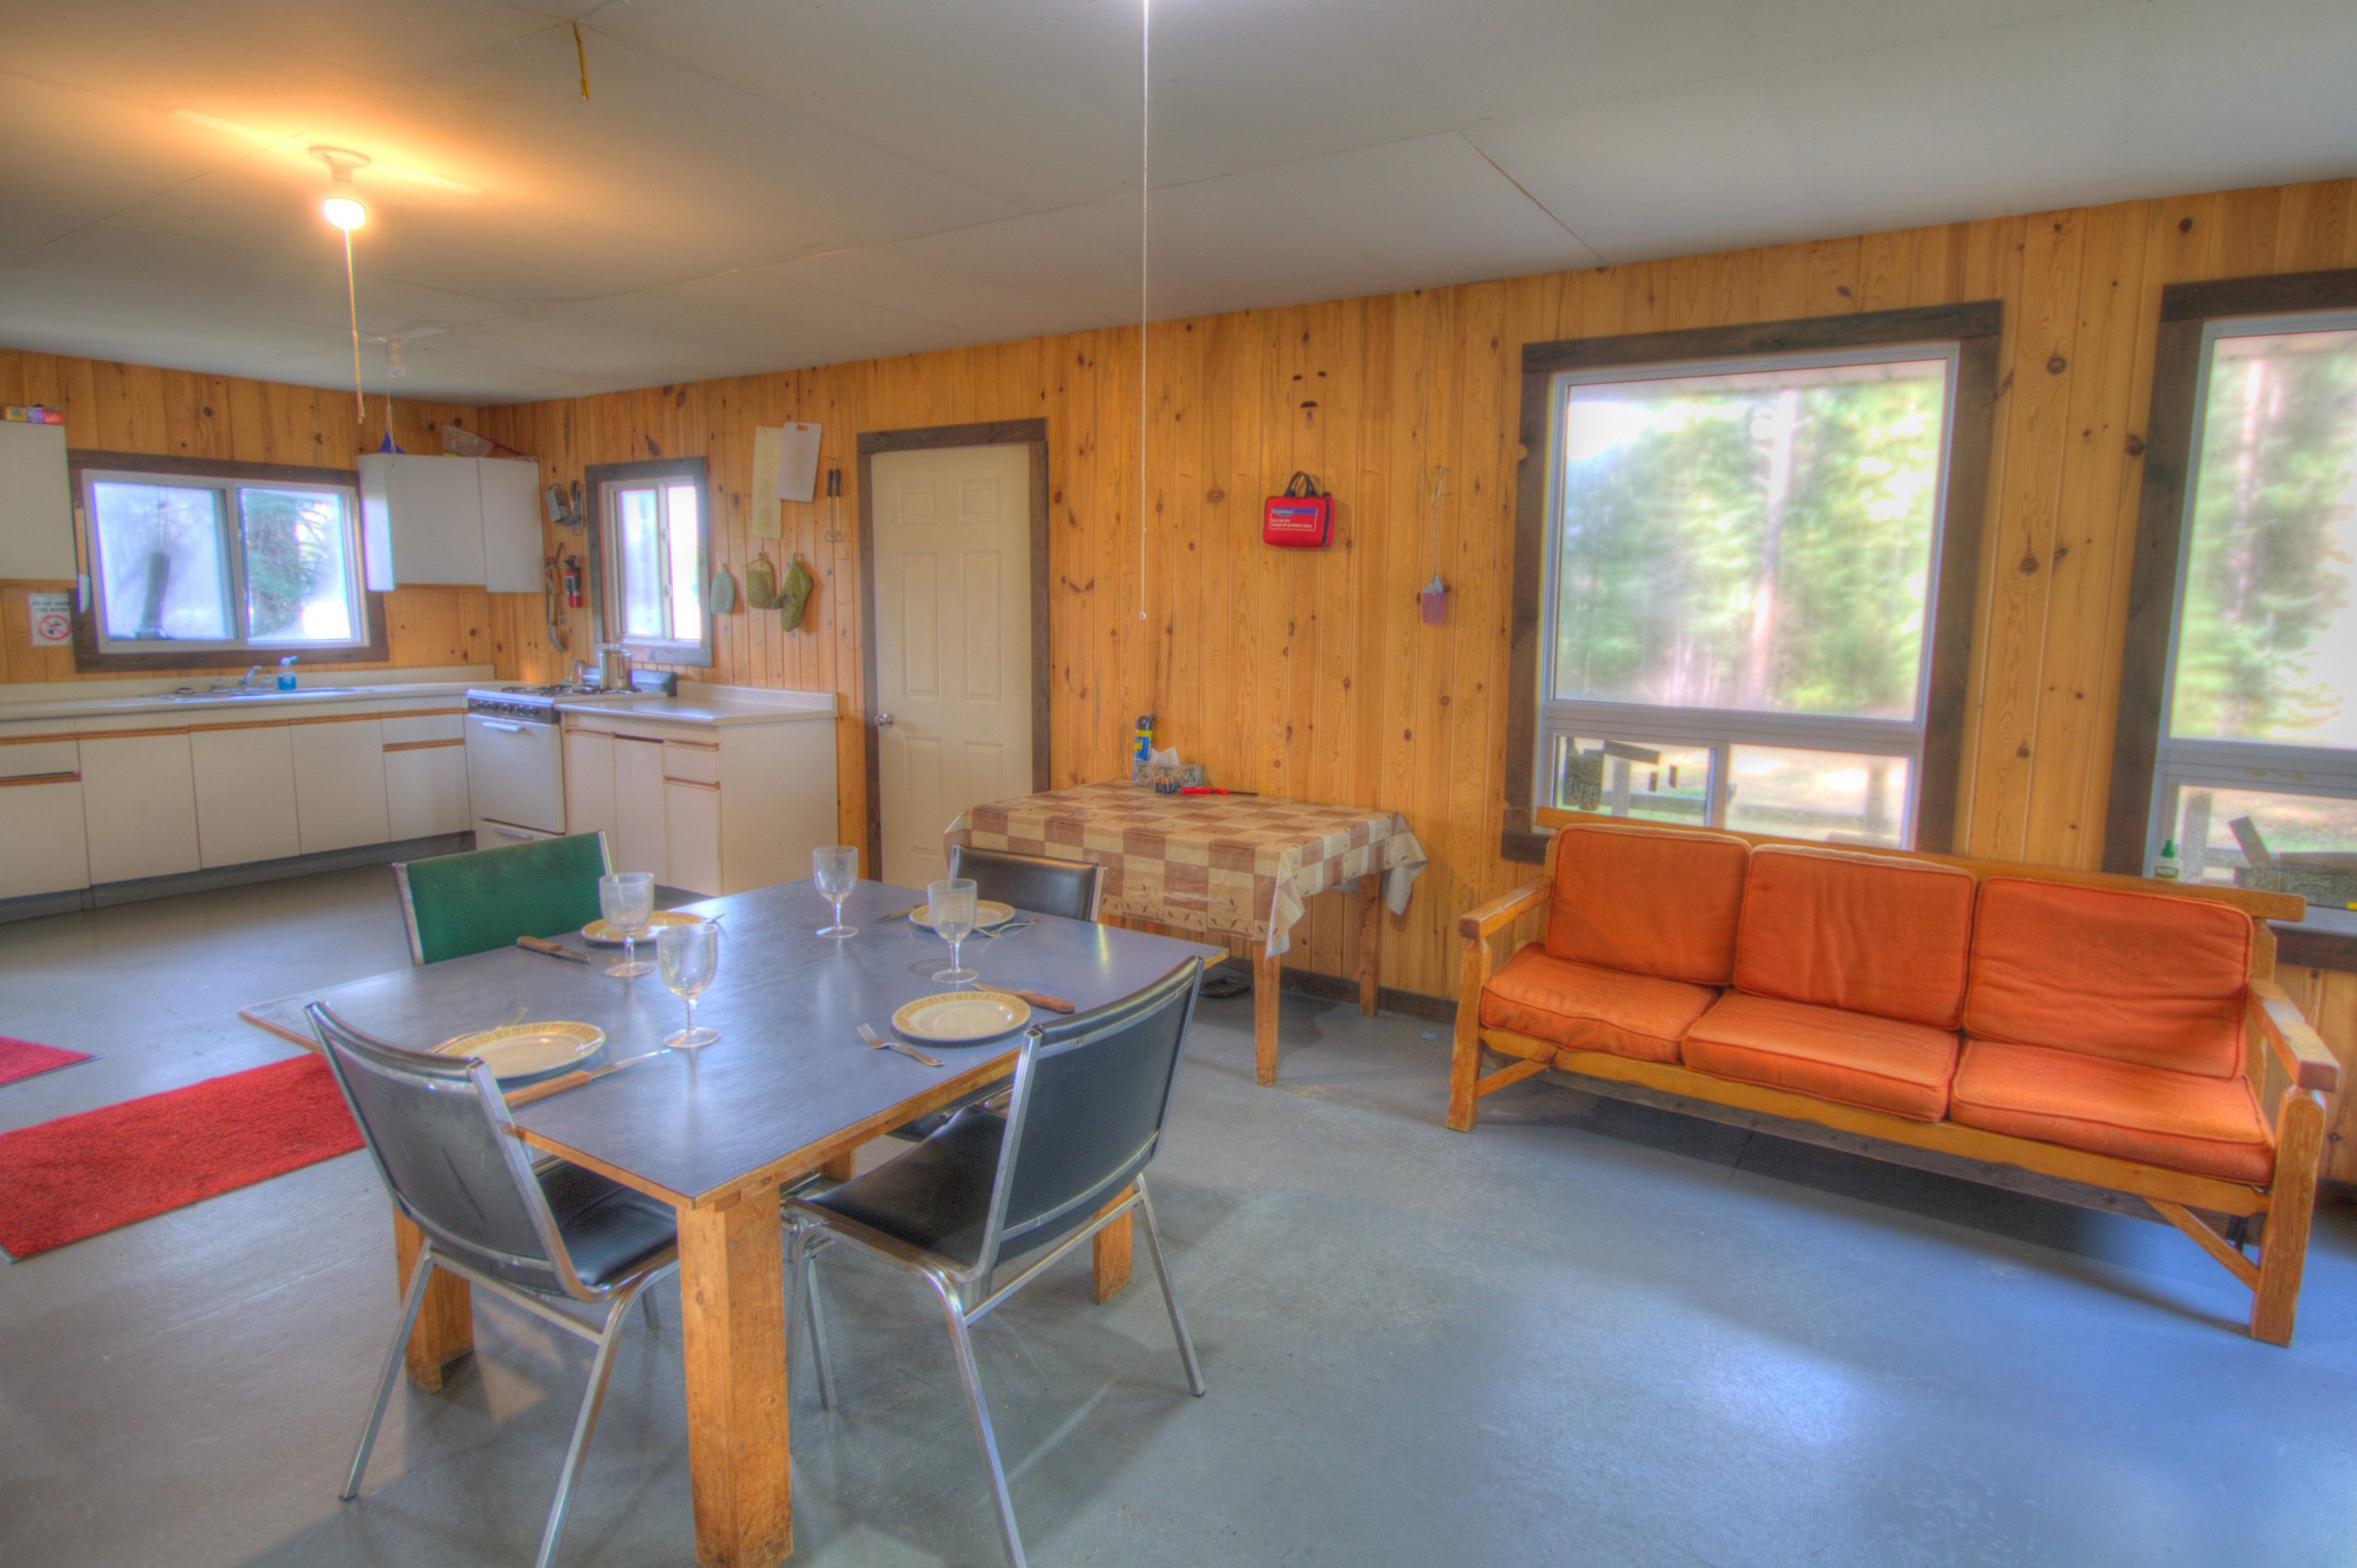 Dimple Lake cabin dining area